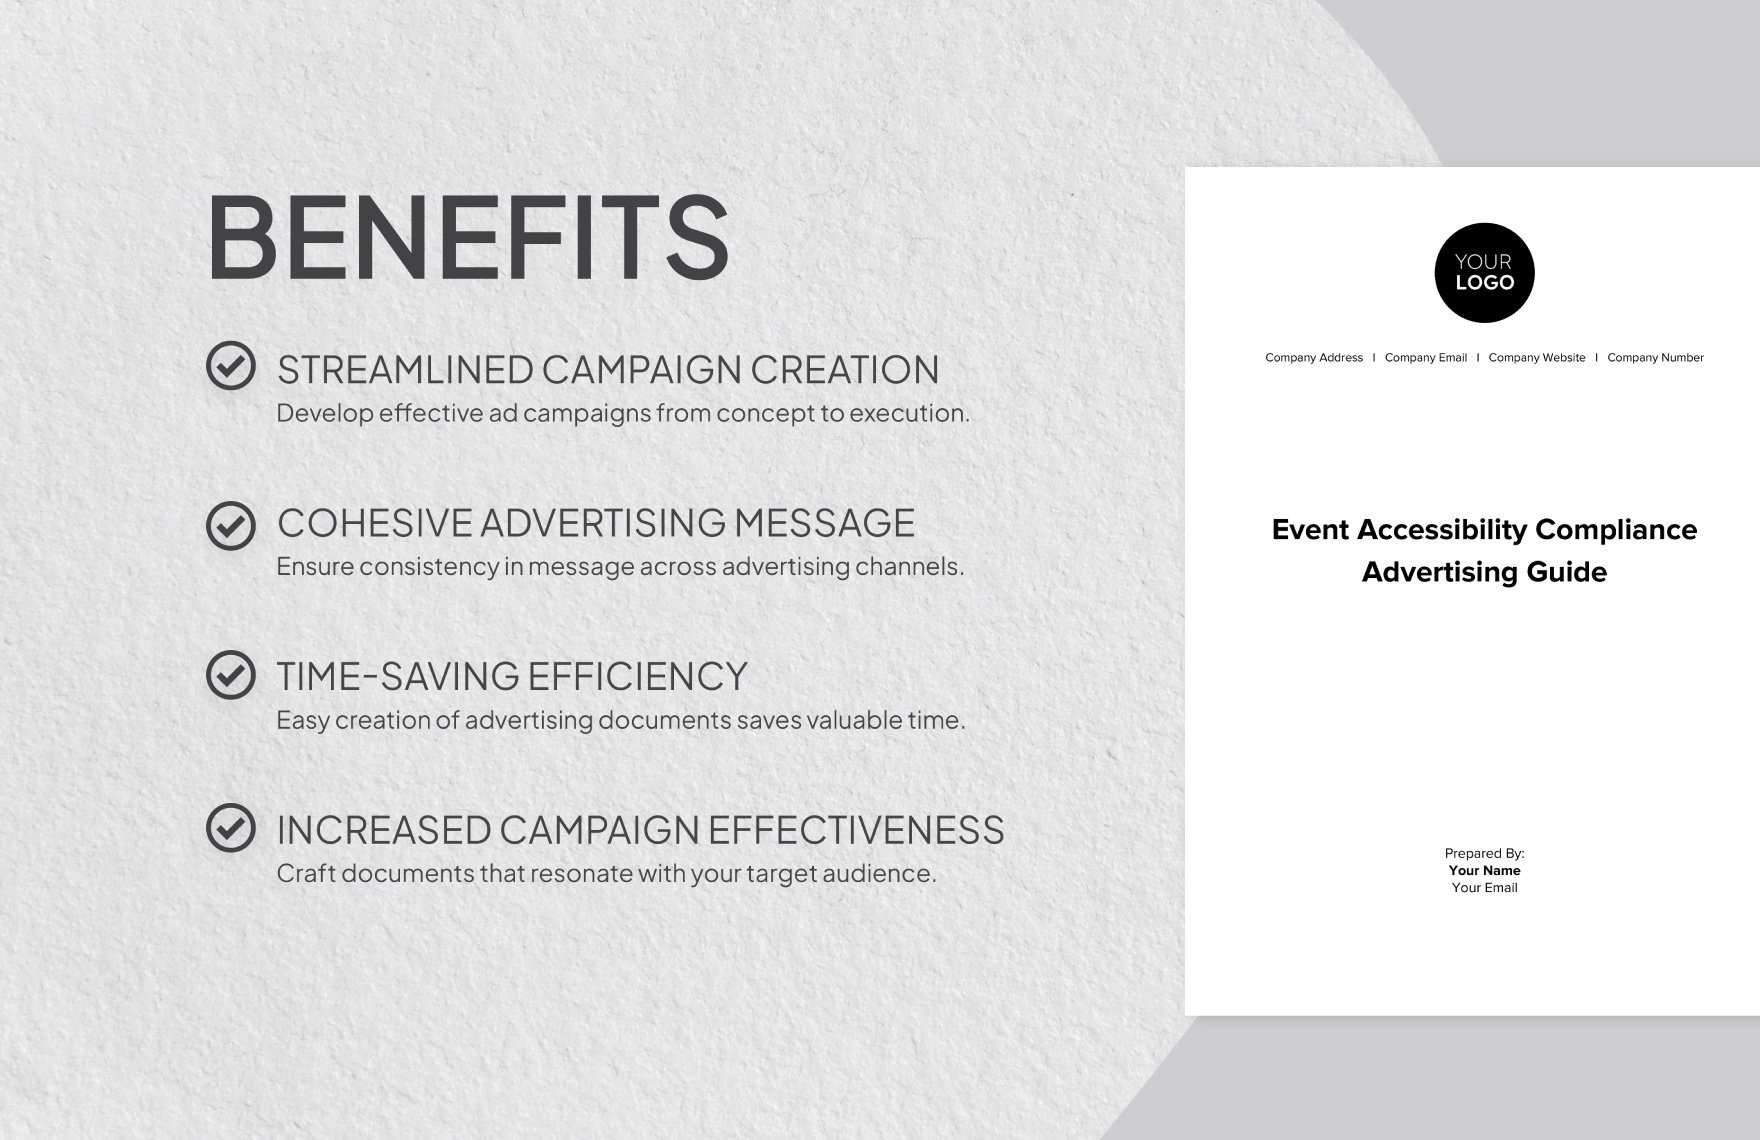 Event Accessibility Compliance Advertising Guide Template